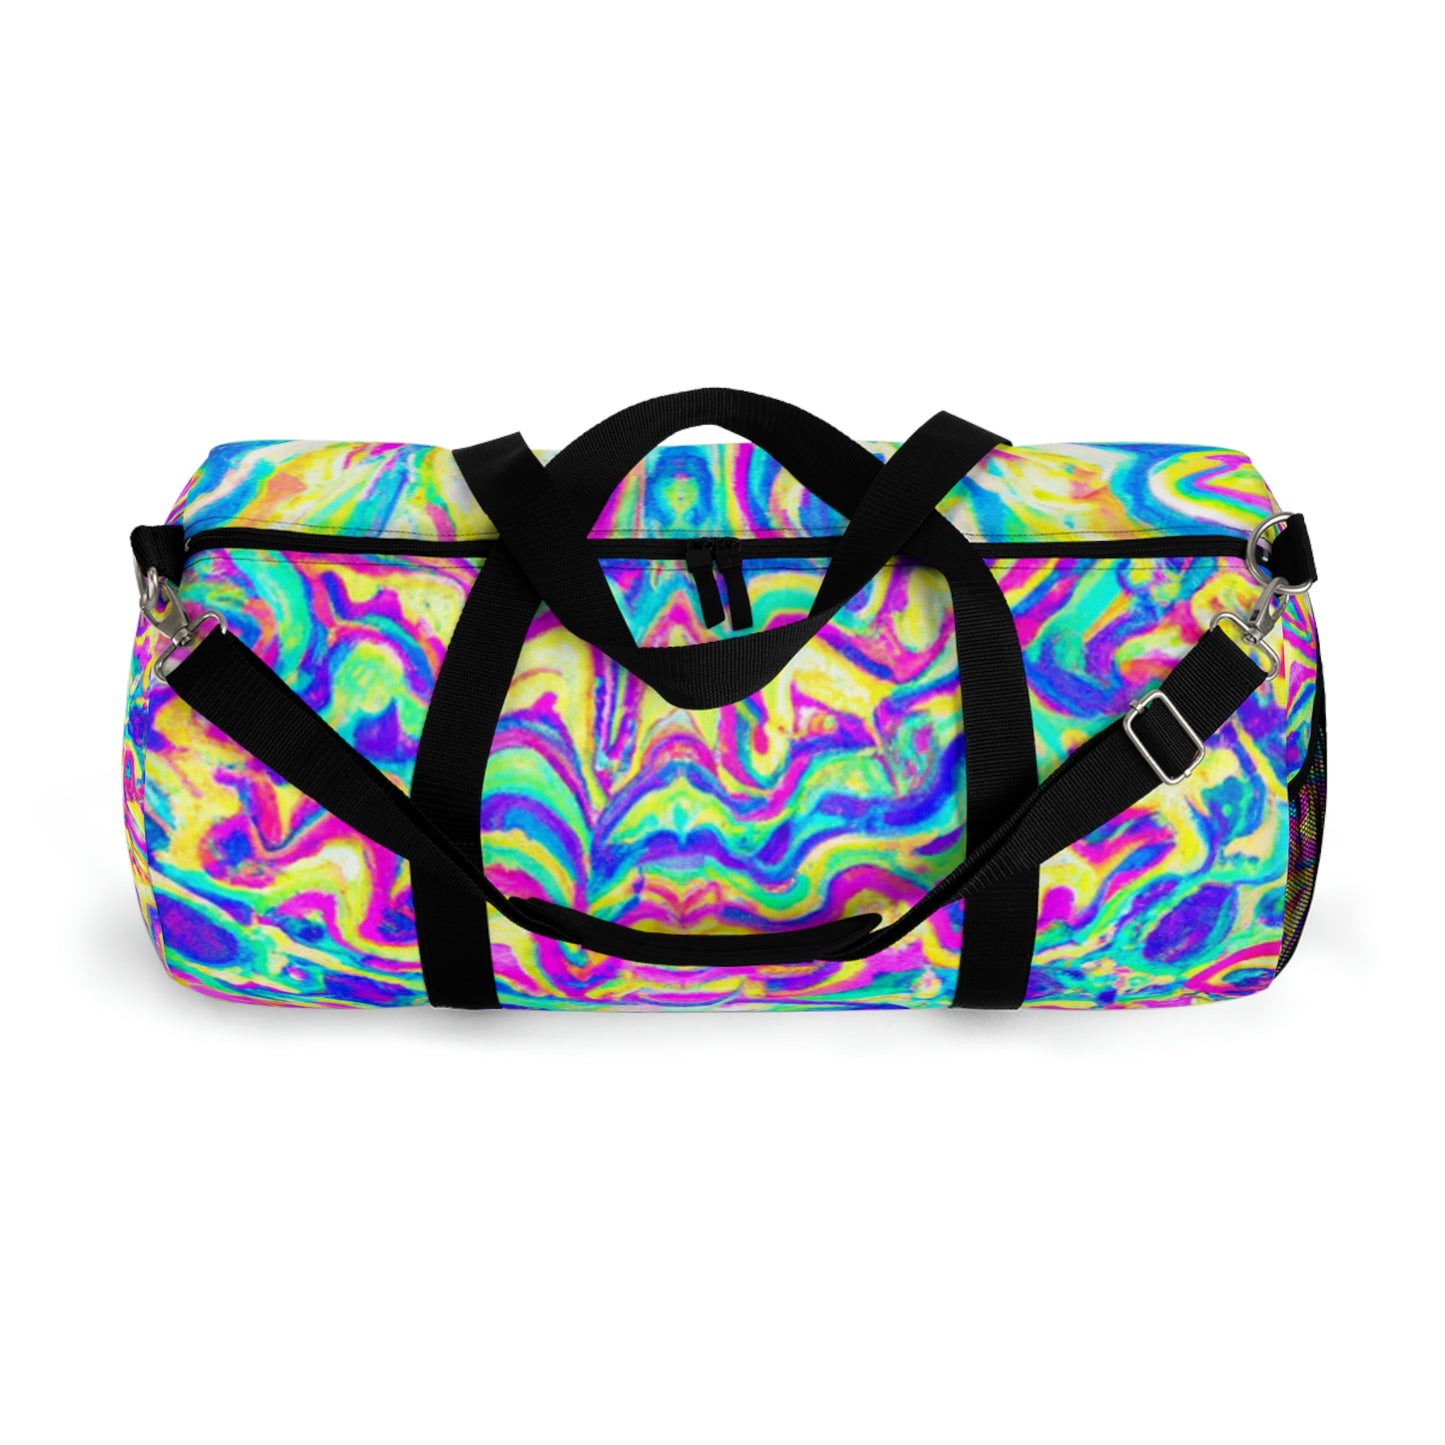 Chesterfield - Psychedelic Duffel Bag